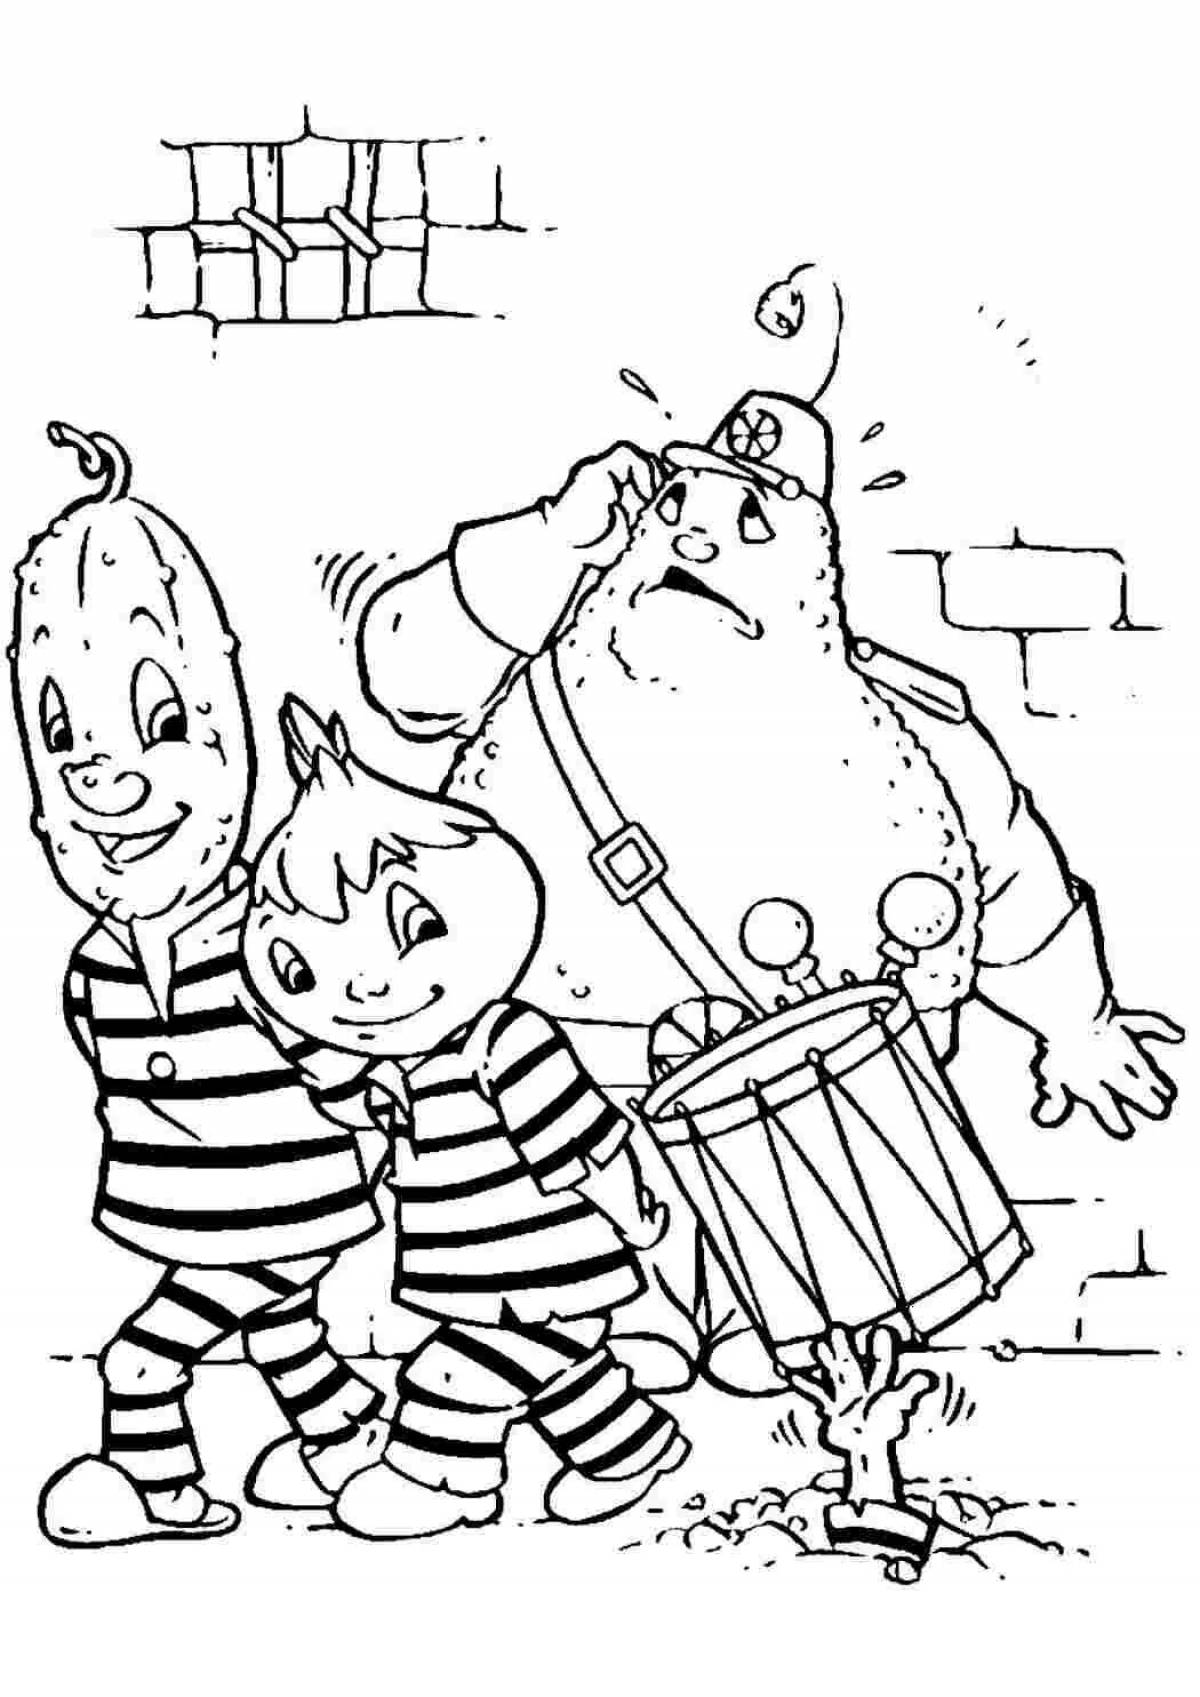 Chippolino bold coloring page